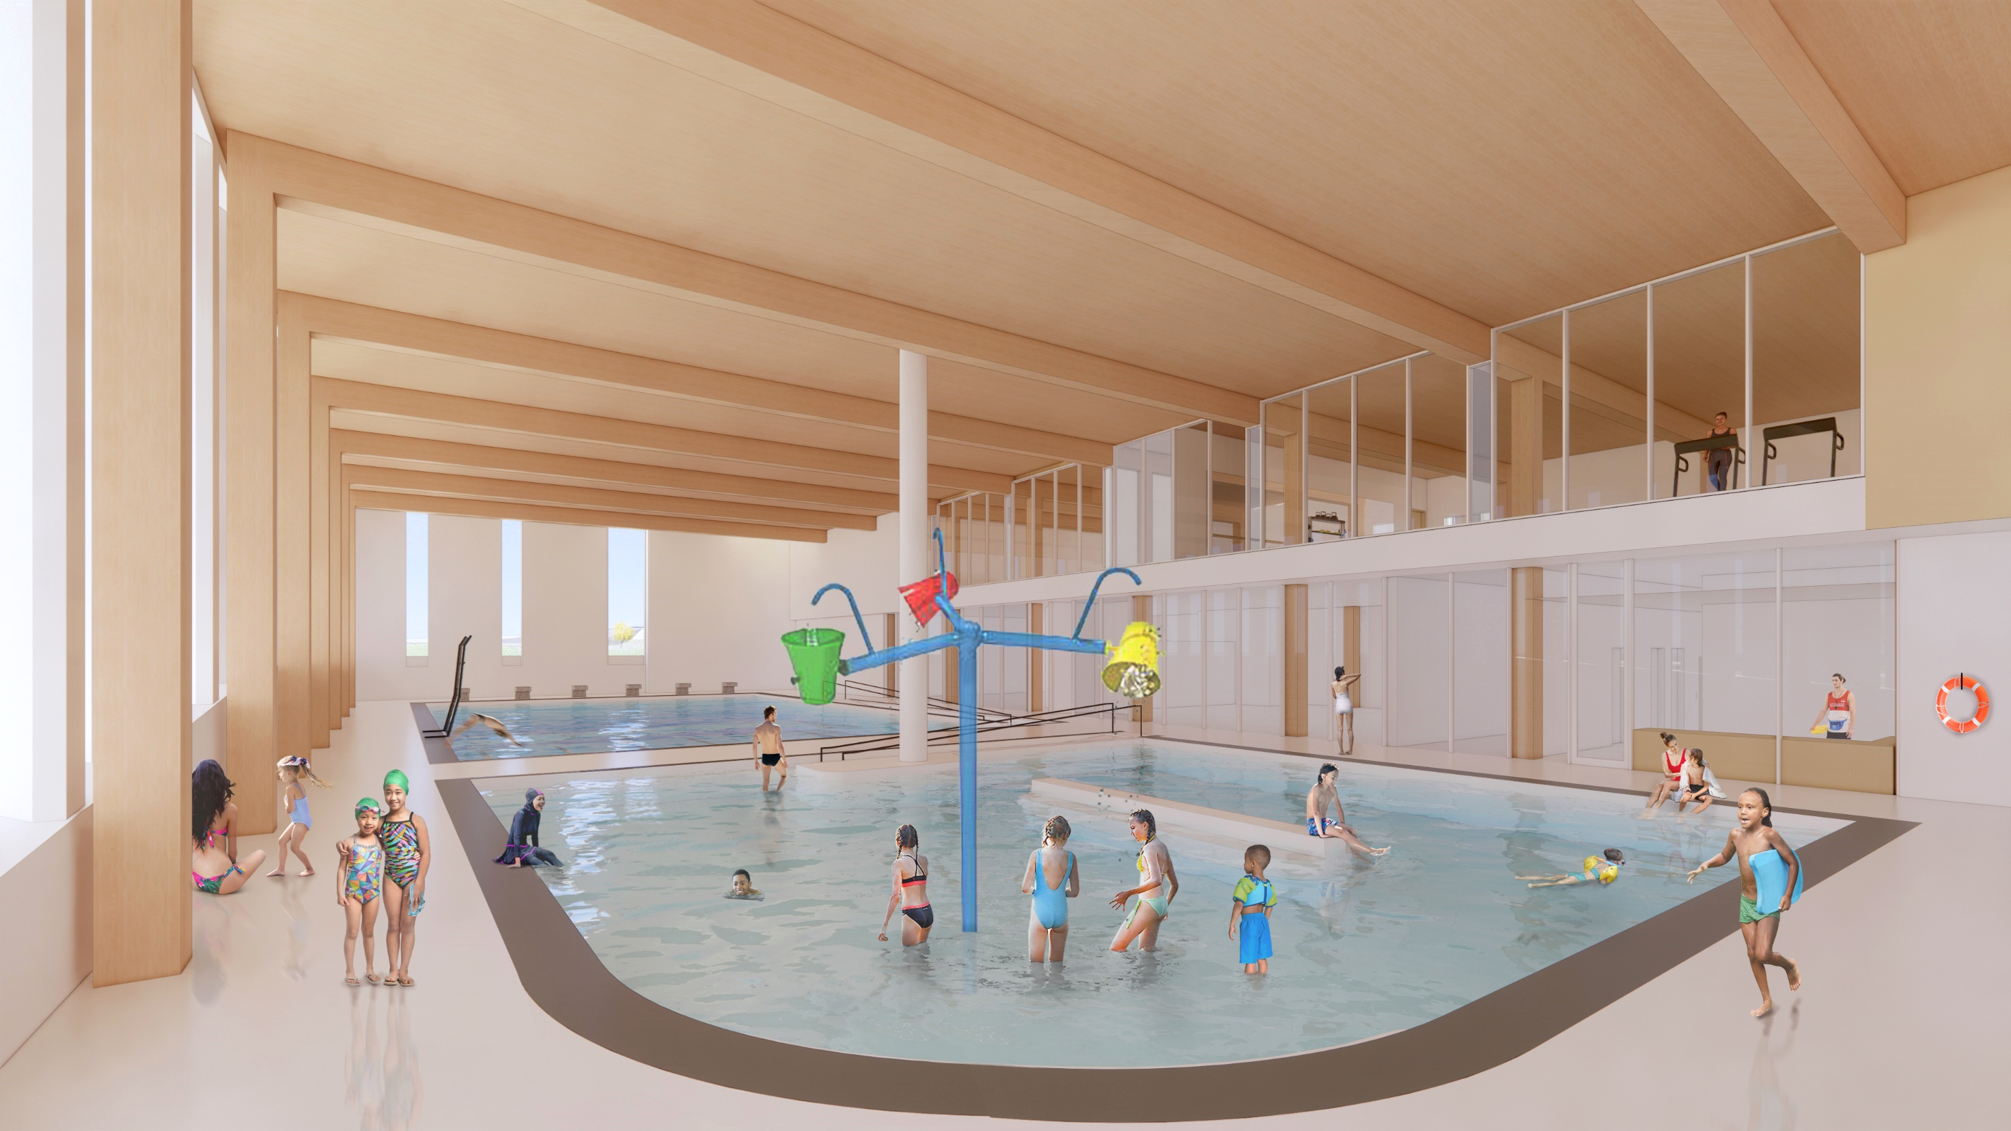 Draft design rendering of the aquatics facility showing the leisure pool in the foreground with 3 dump-bucket water play features and lane pool in the background with a removable climbing wall feature. Both pools have accessible ramp entrances.